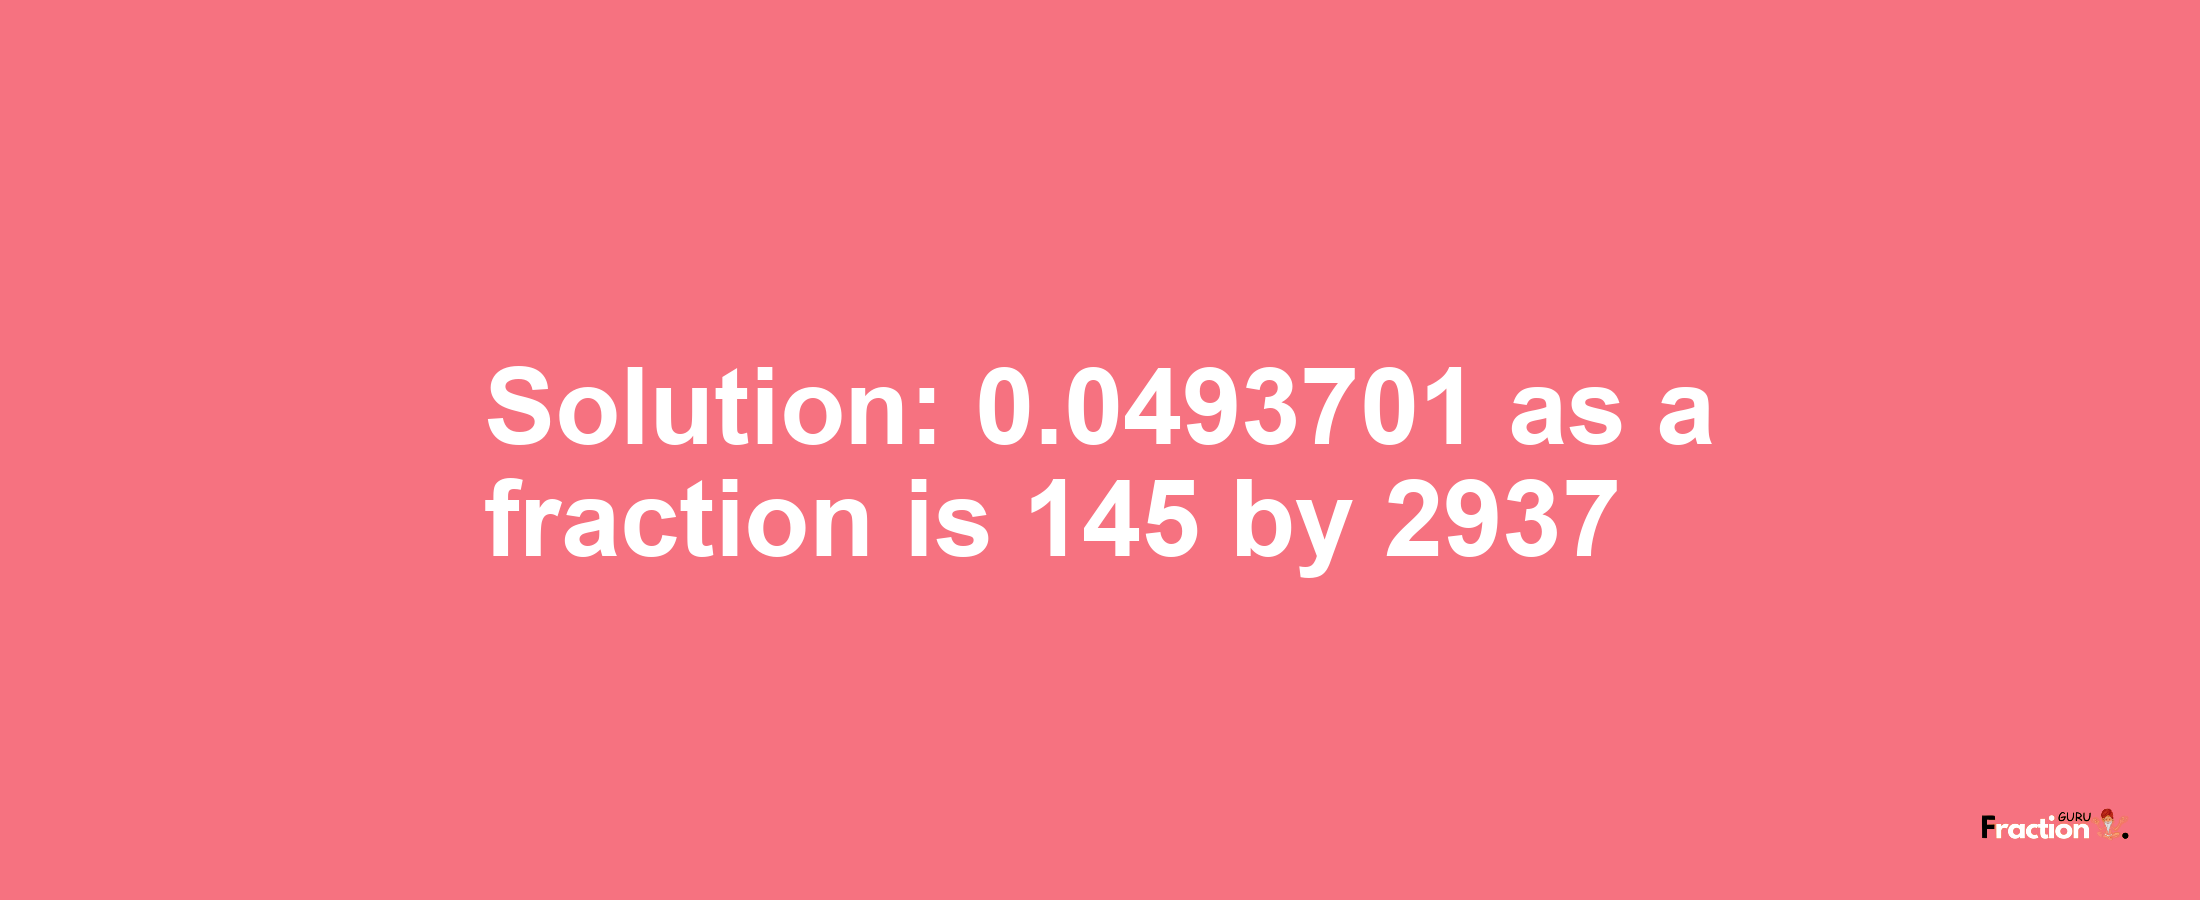 Solution:0.0493701 as a fraction is 145/2937